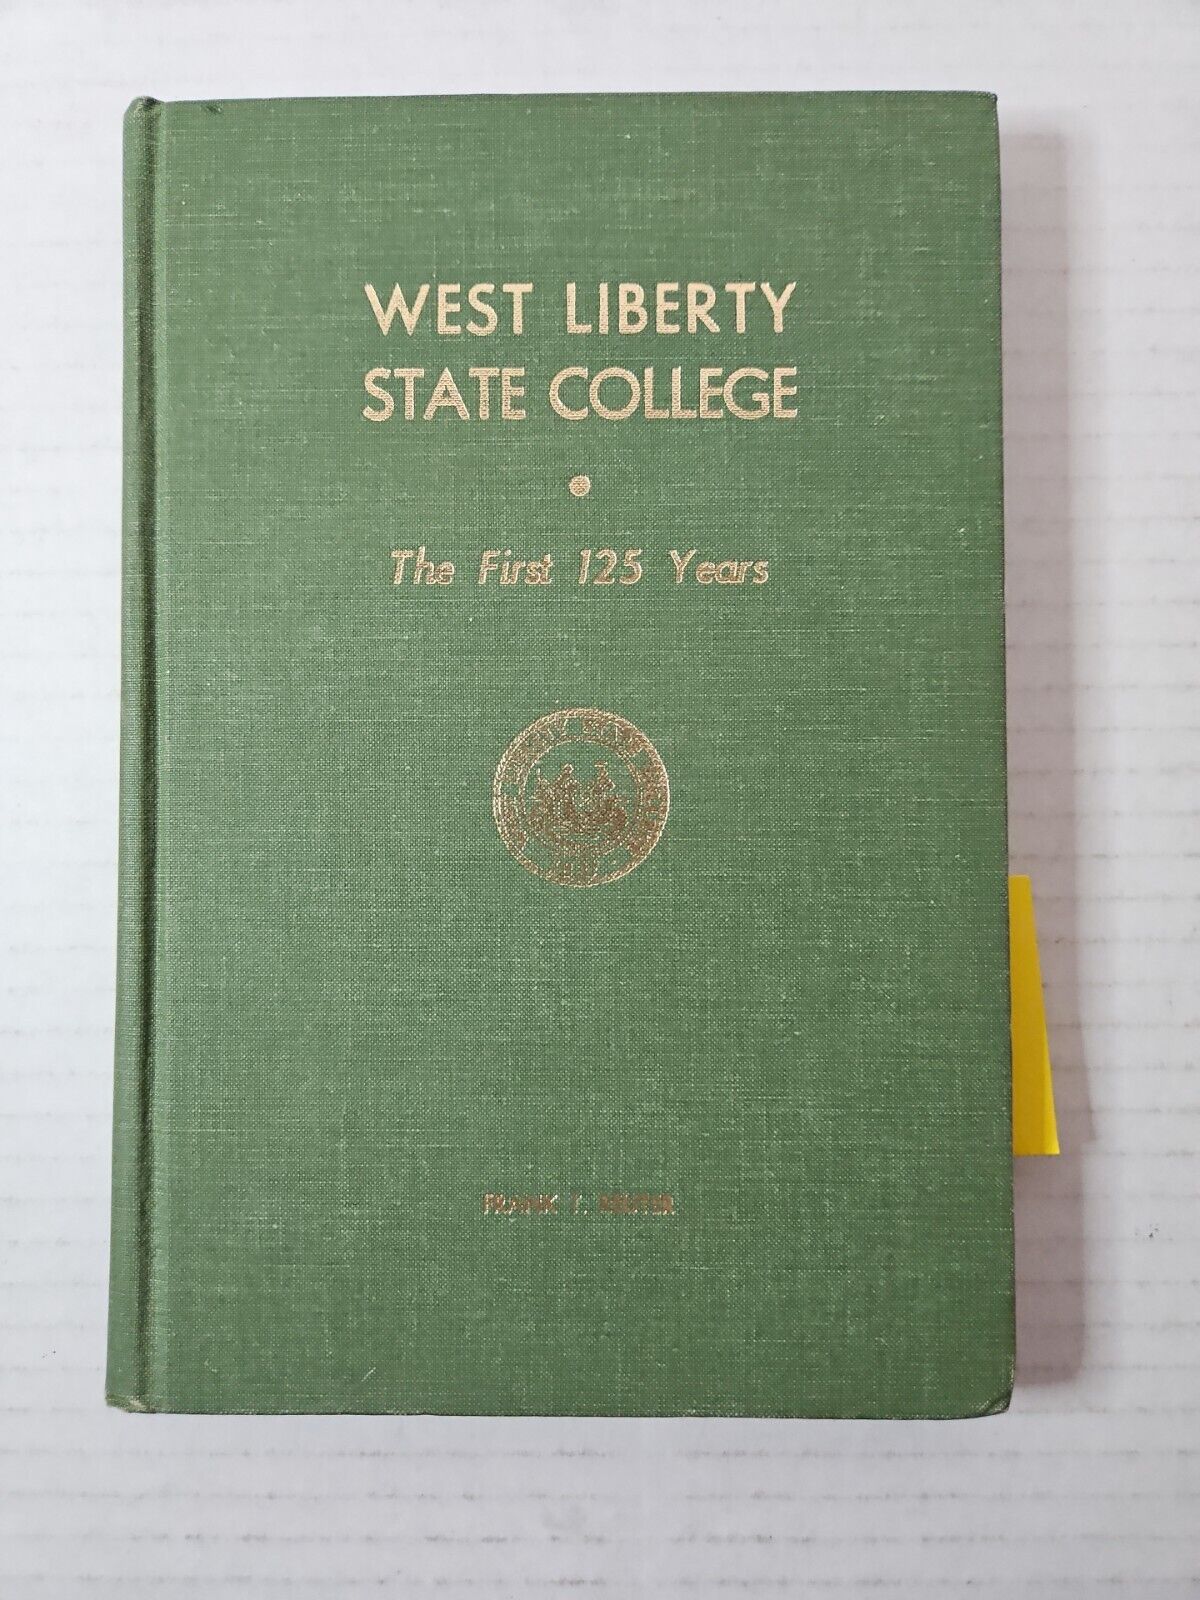 West Liberty State College--The First 125 Years--Frank T. Reuter 1963